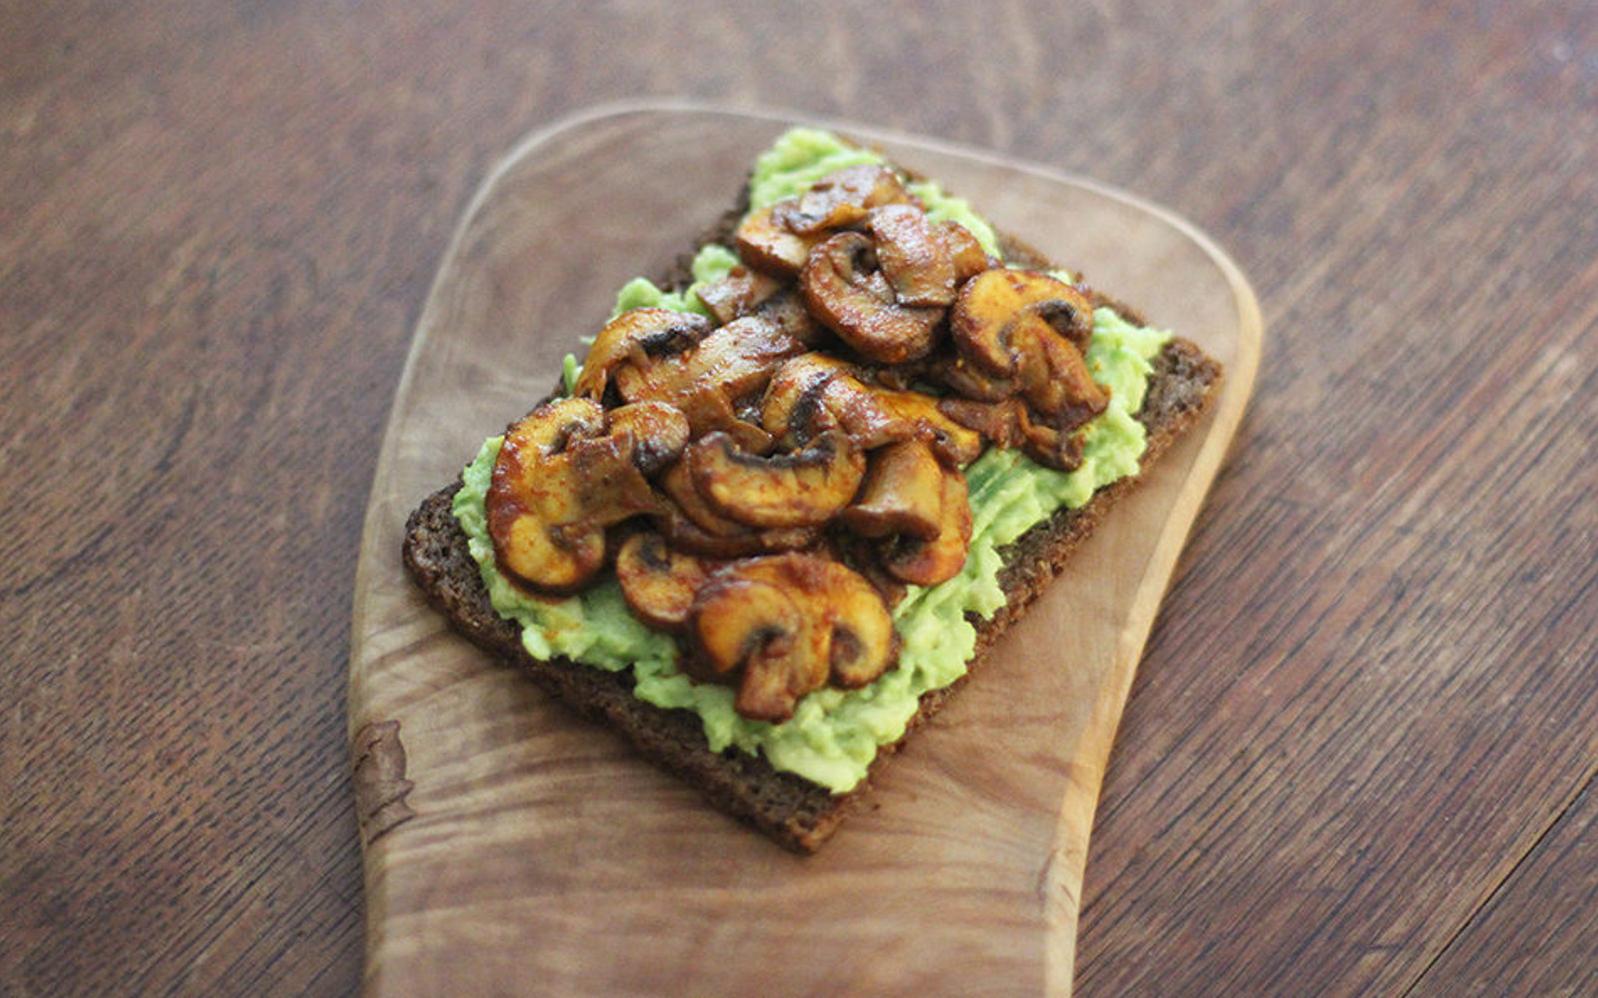  Fuel your day with this gluten-free and dairy-free toast!